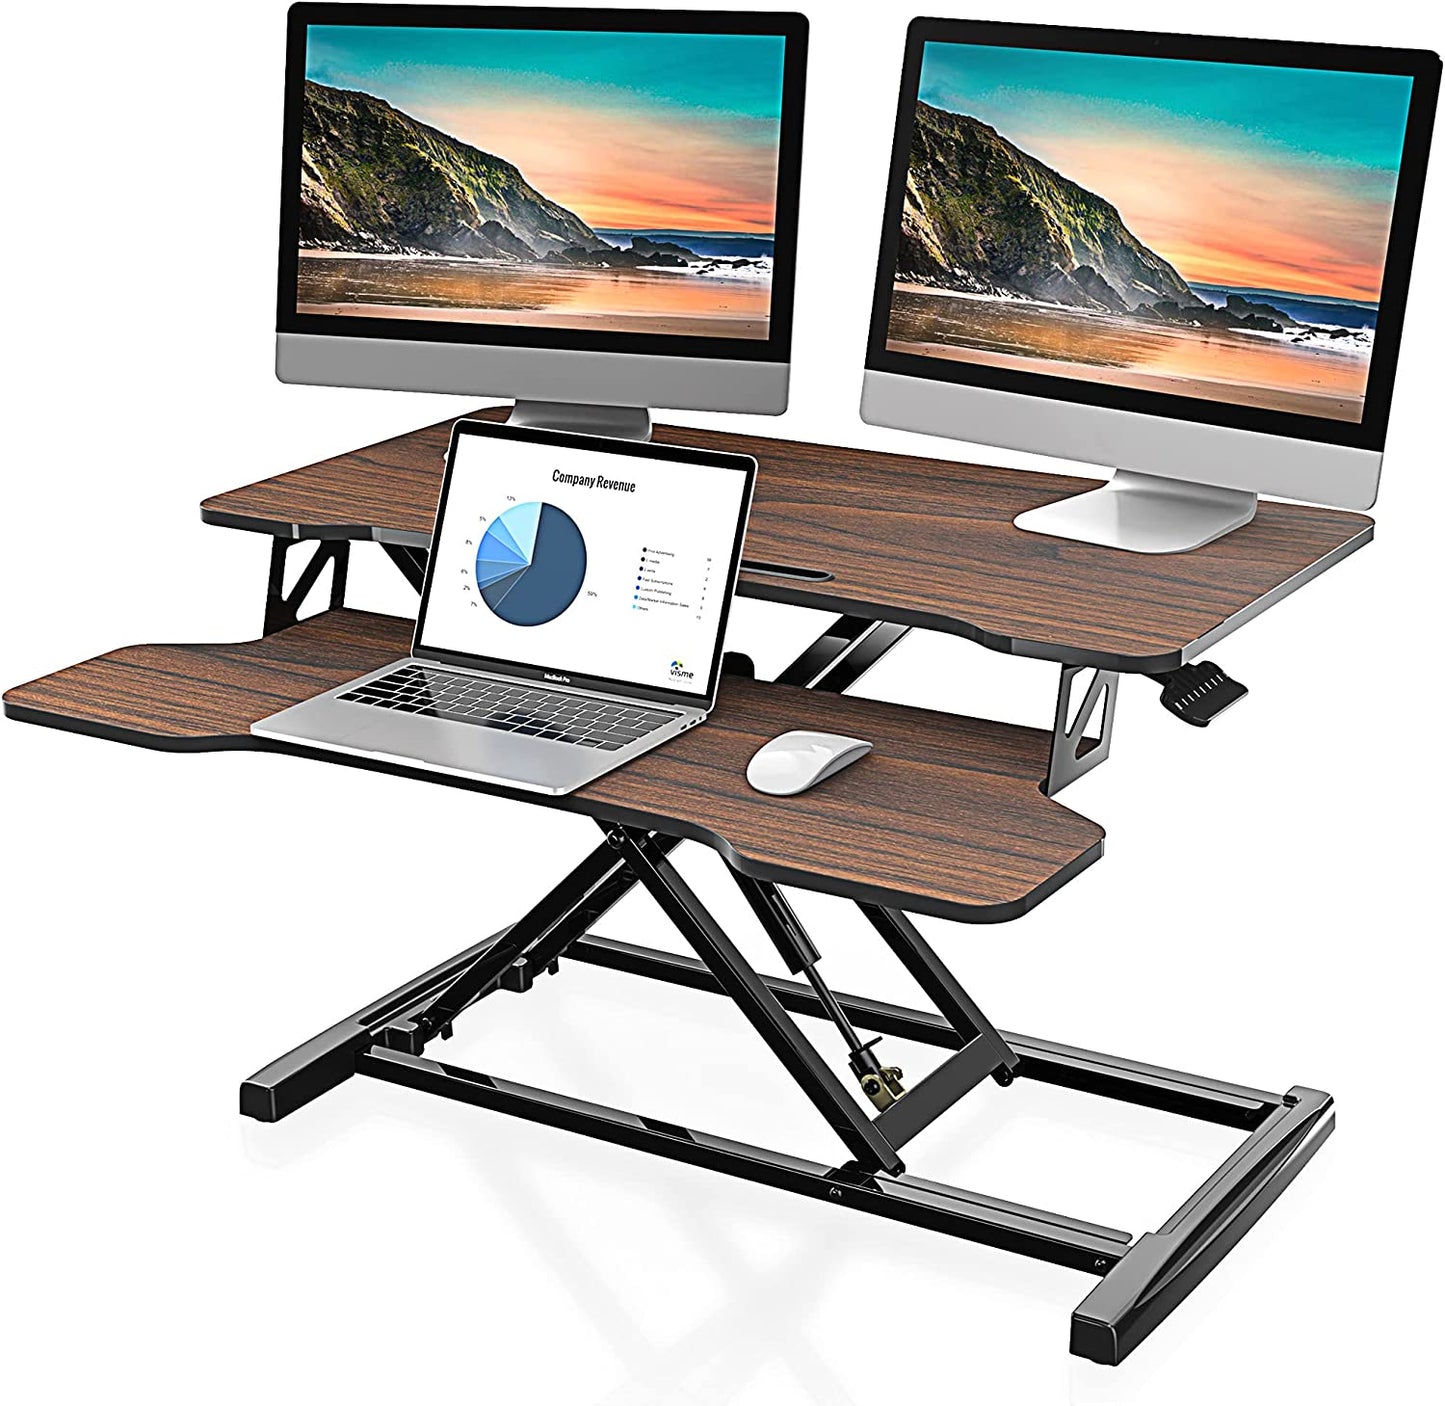 32" Wide Height Adjustable Standing Desk - Sit to Stand Converter for Laptops and Dual Monitors - Brown